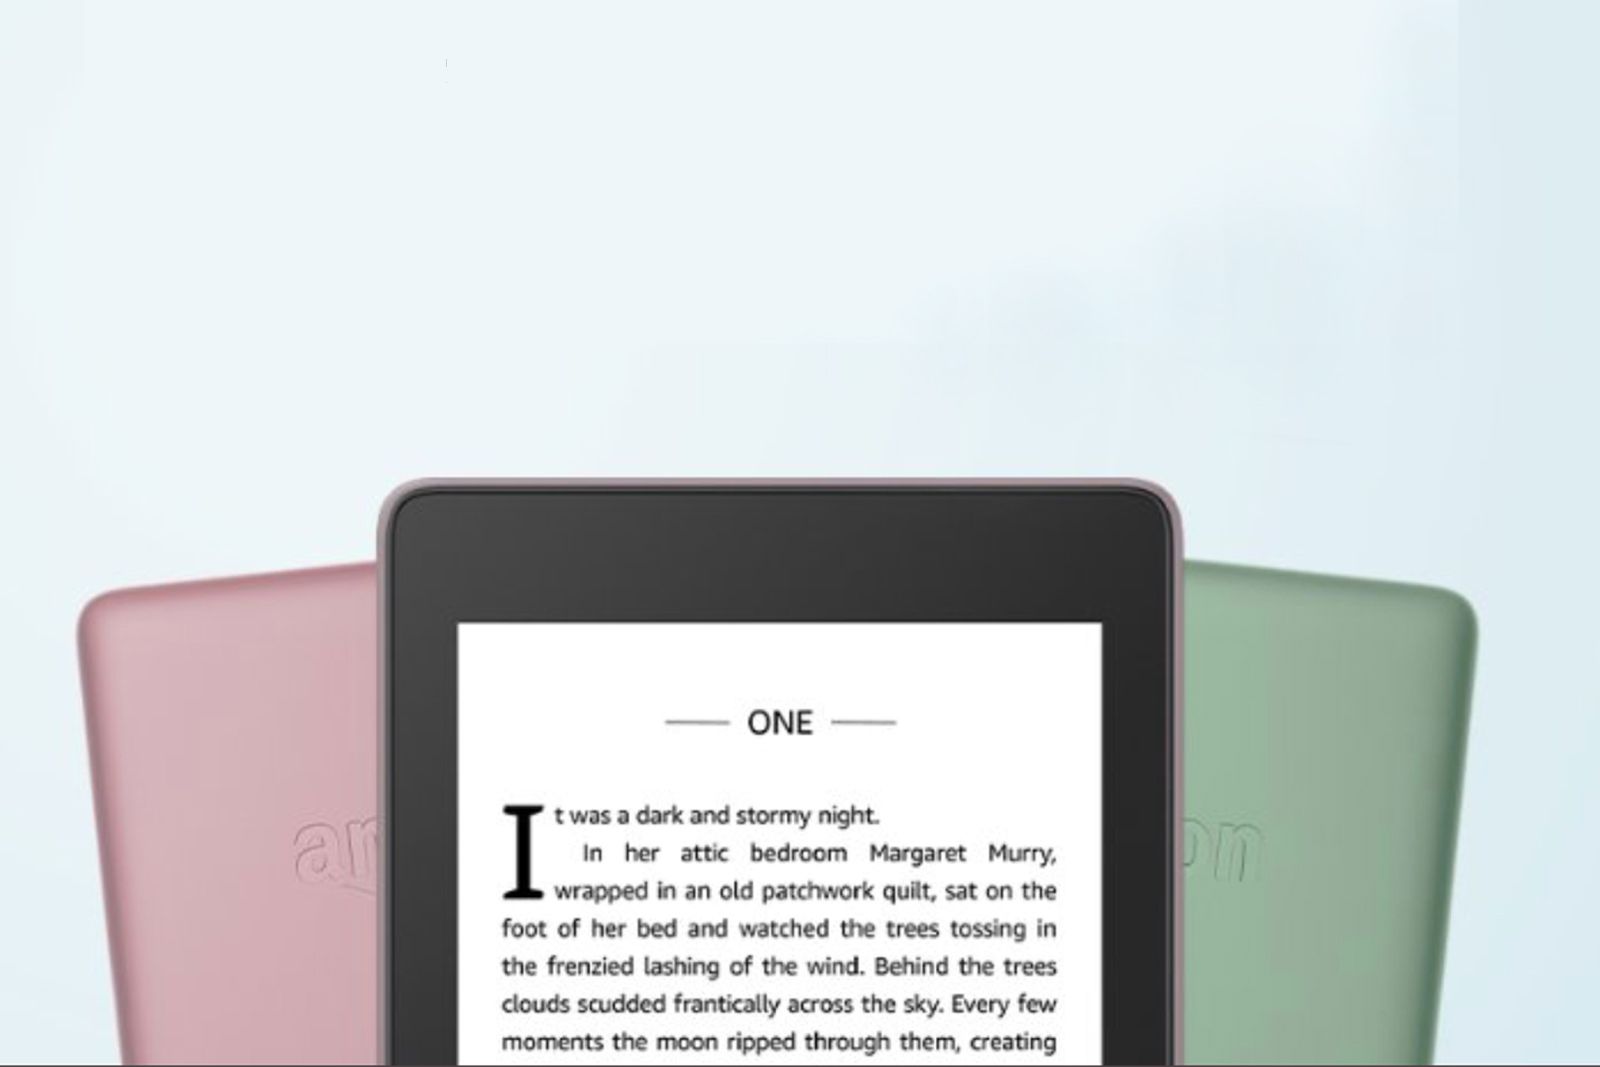 Amazon Kindle Paperwhite now available in Plum and Sage colour options image 1